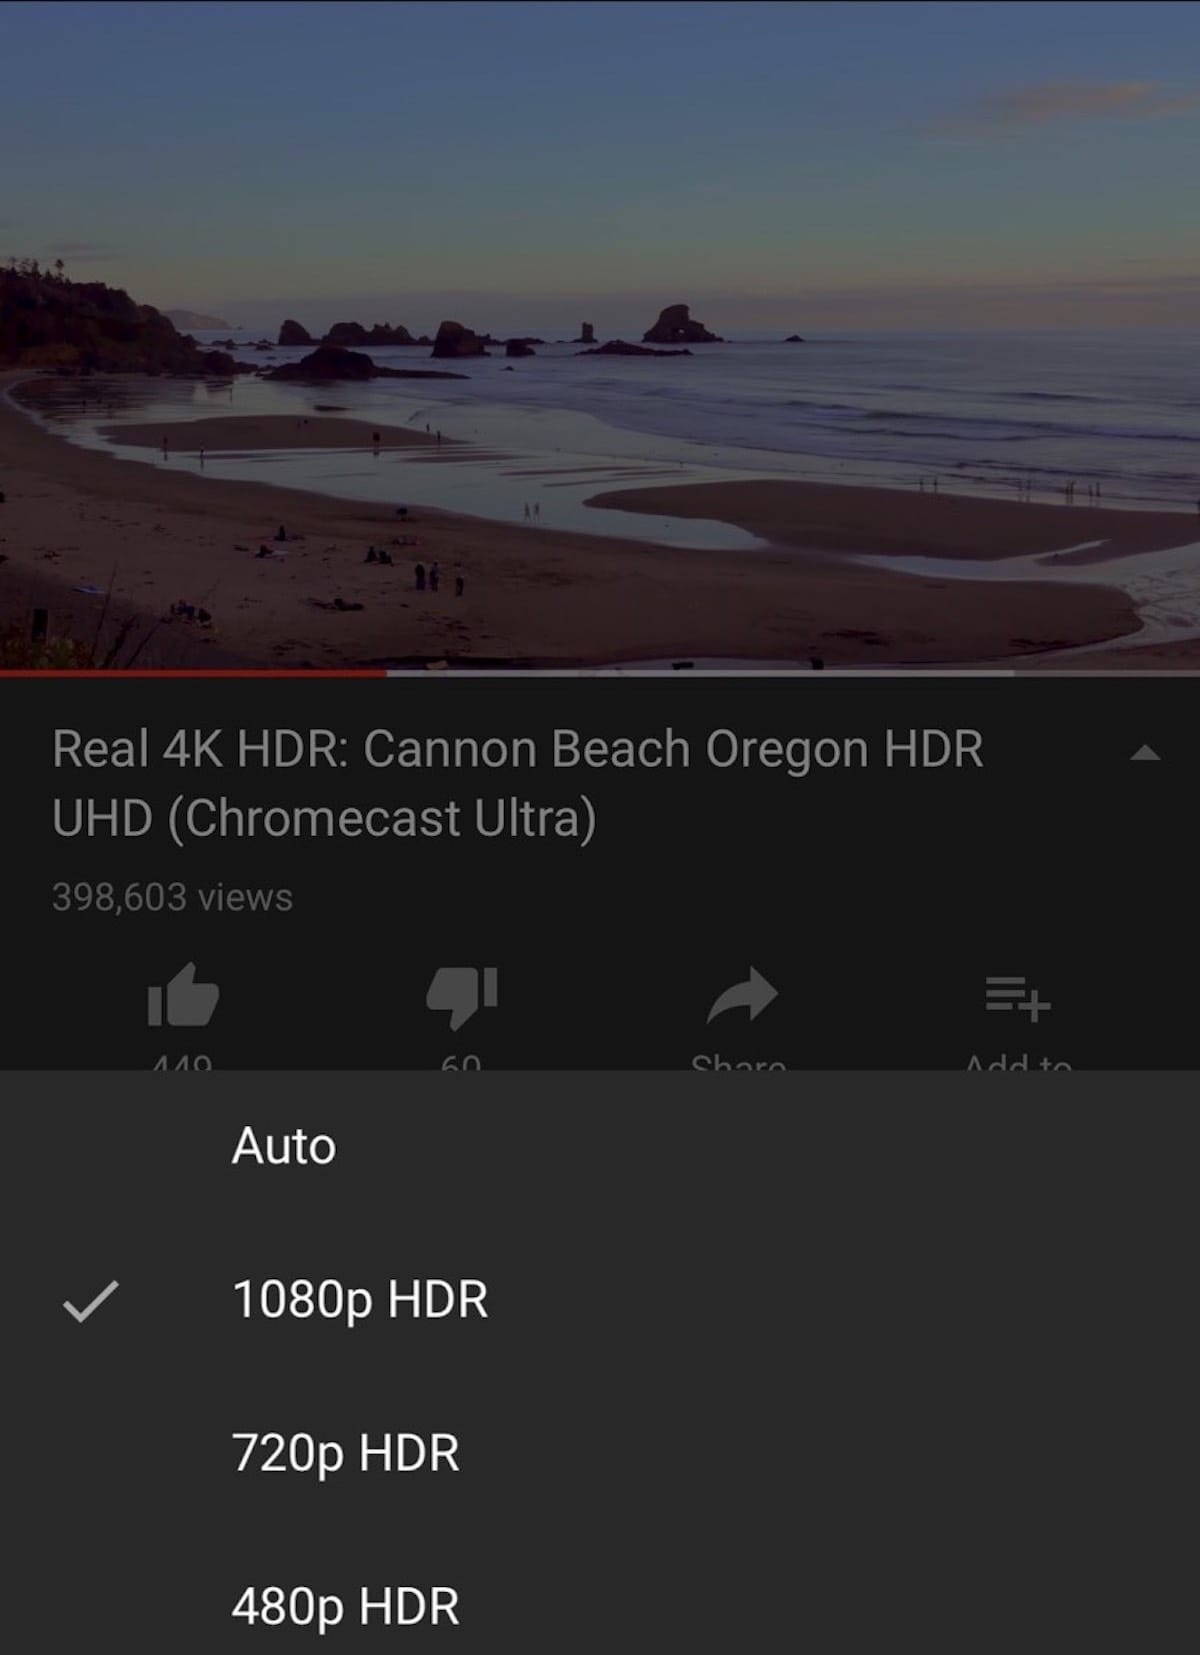 YouTubeが最新iPhoneでのHDR再生に対応！リアルな空気感が伝わる動画を体感！ technology180511_youtube-iphone-hdr_2-1200x1655